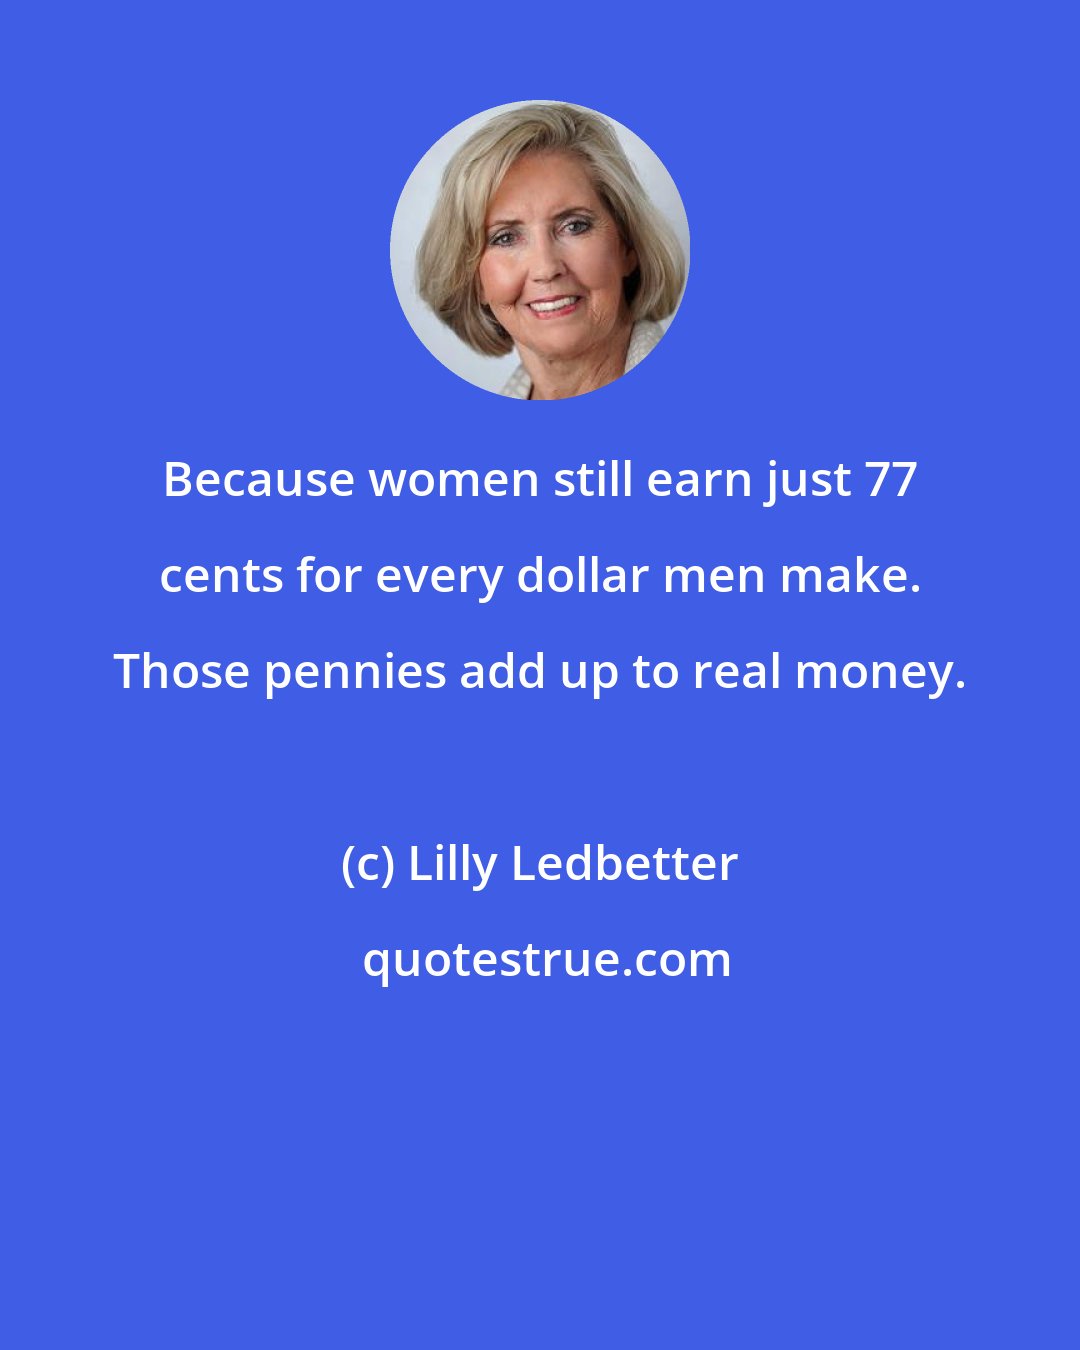 Lilly Ledbetter: Because women still earn just 77 cents for every dollar men make. Those pennies add up to real money.